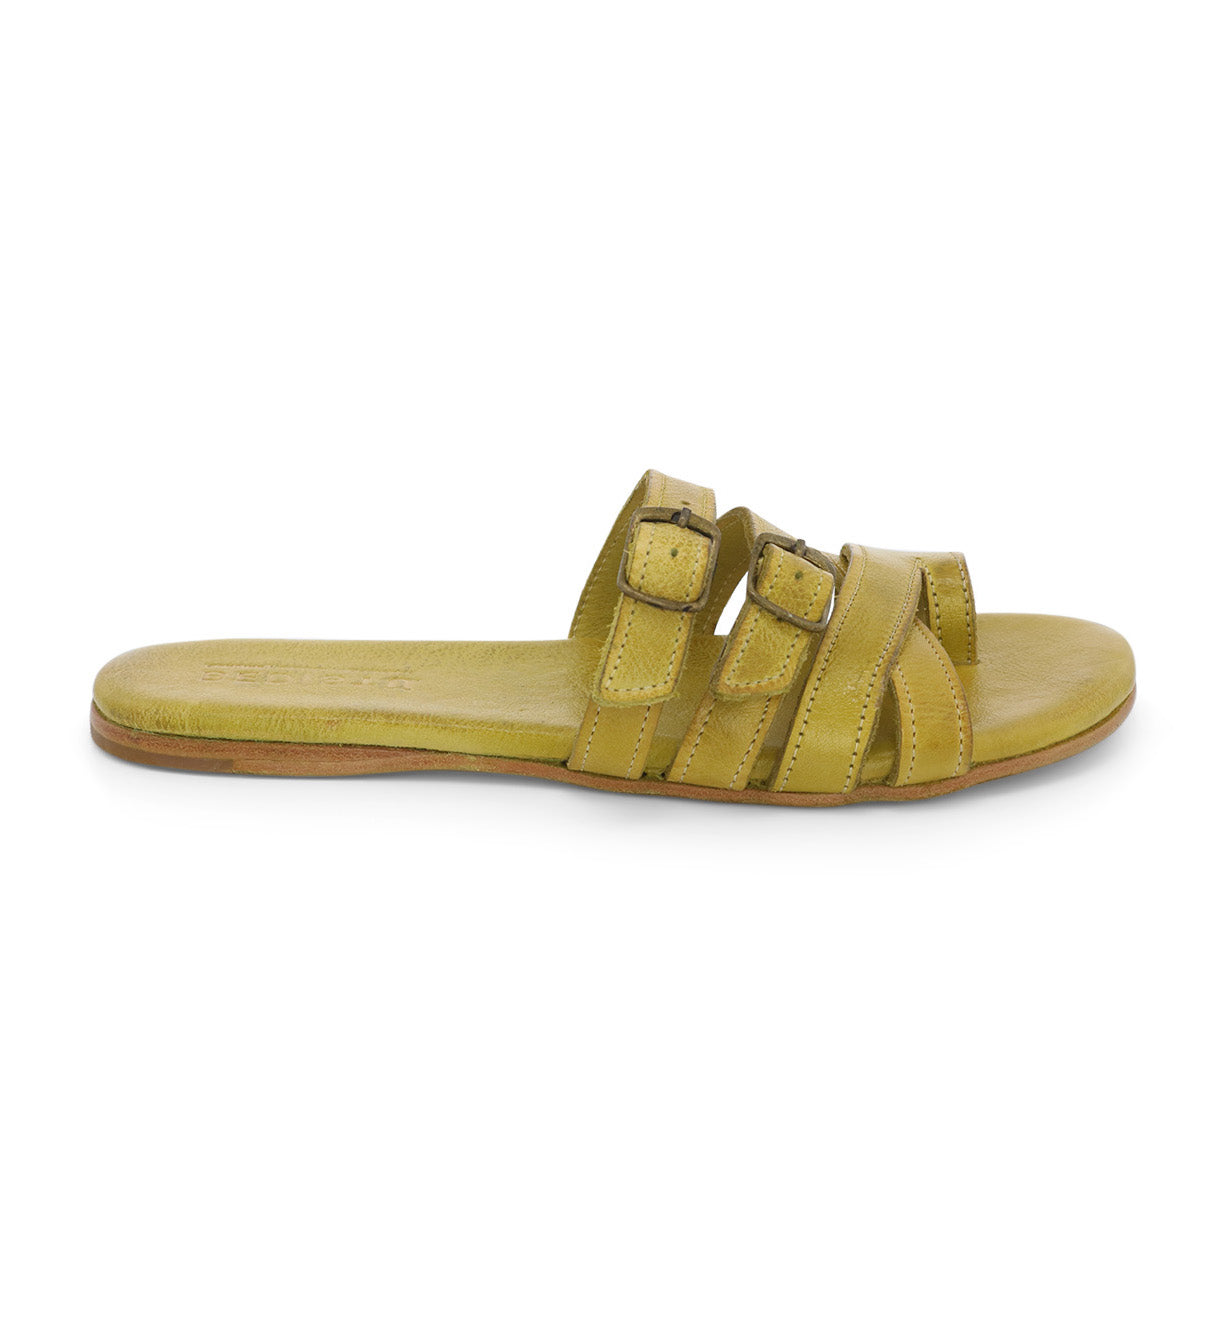 Yellow Hilda sandals with buckles from Bed Stu.